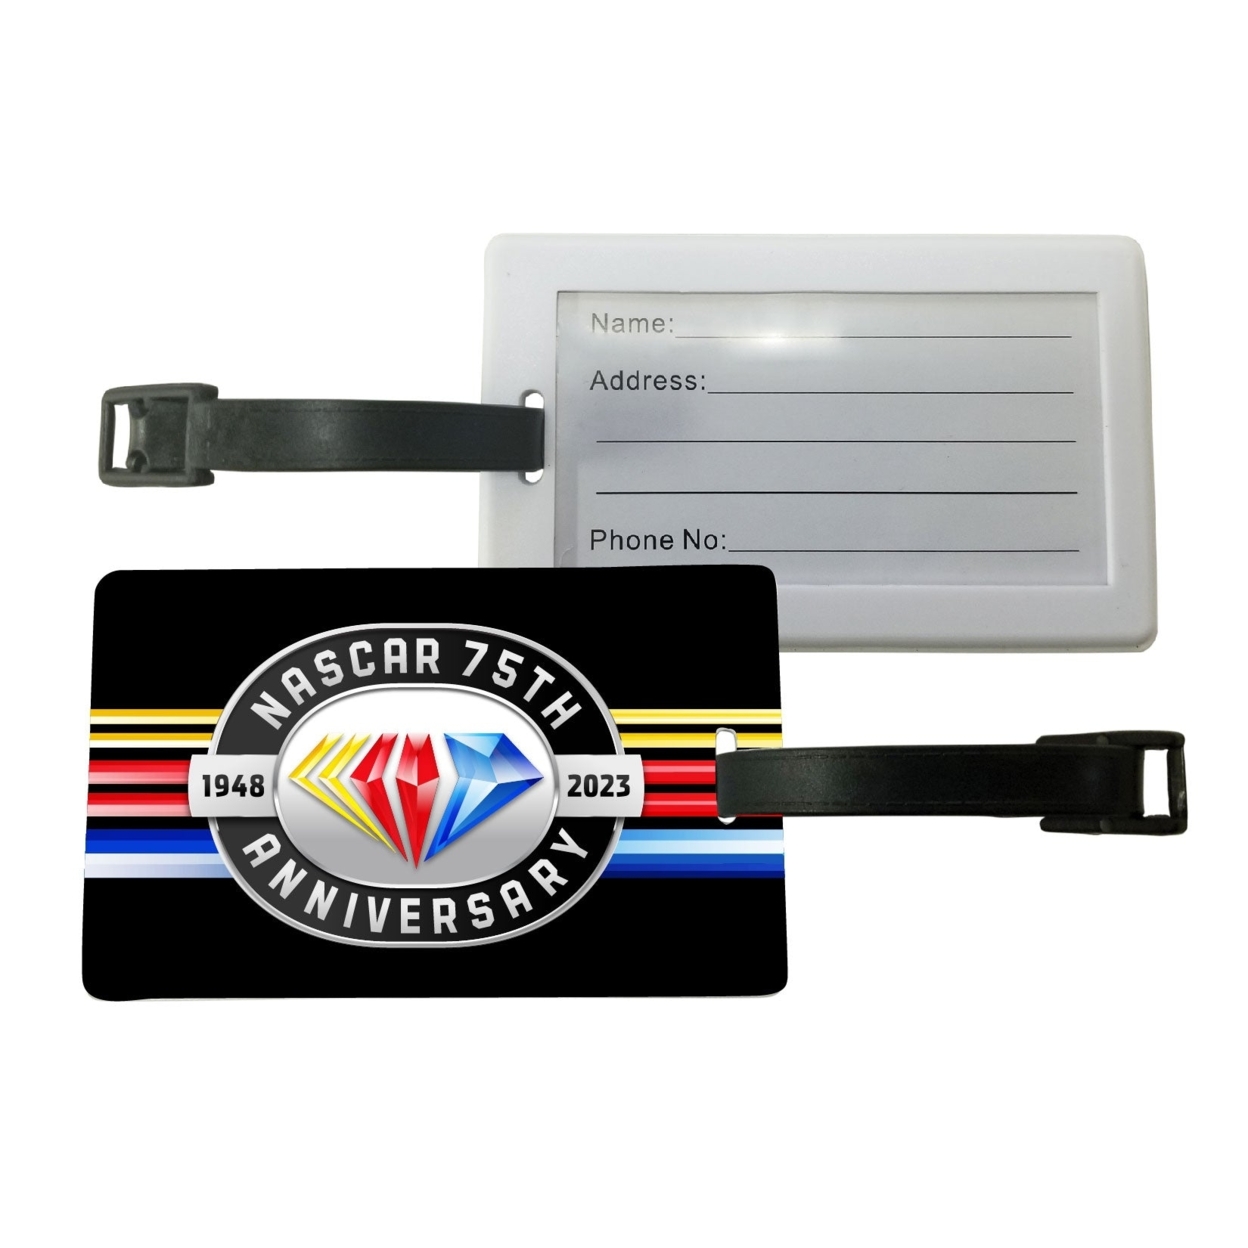 NASCAR 75 Year Anniversary Officially Licensed Luggage Tag